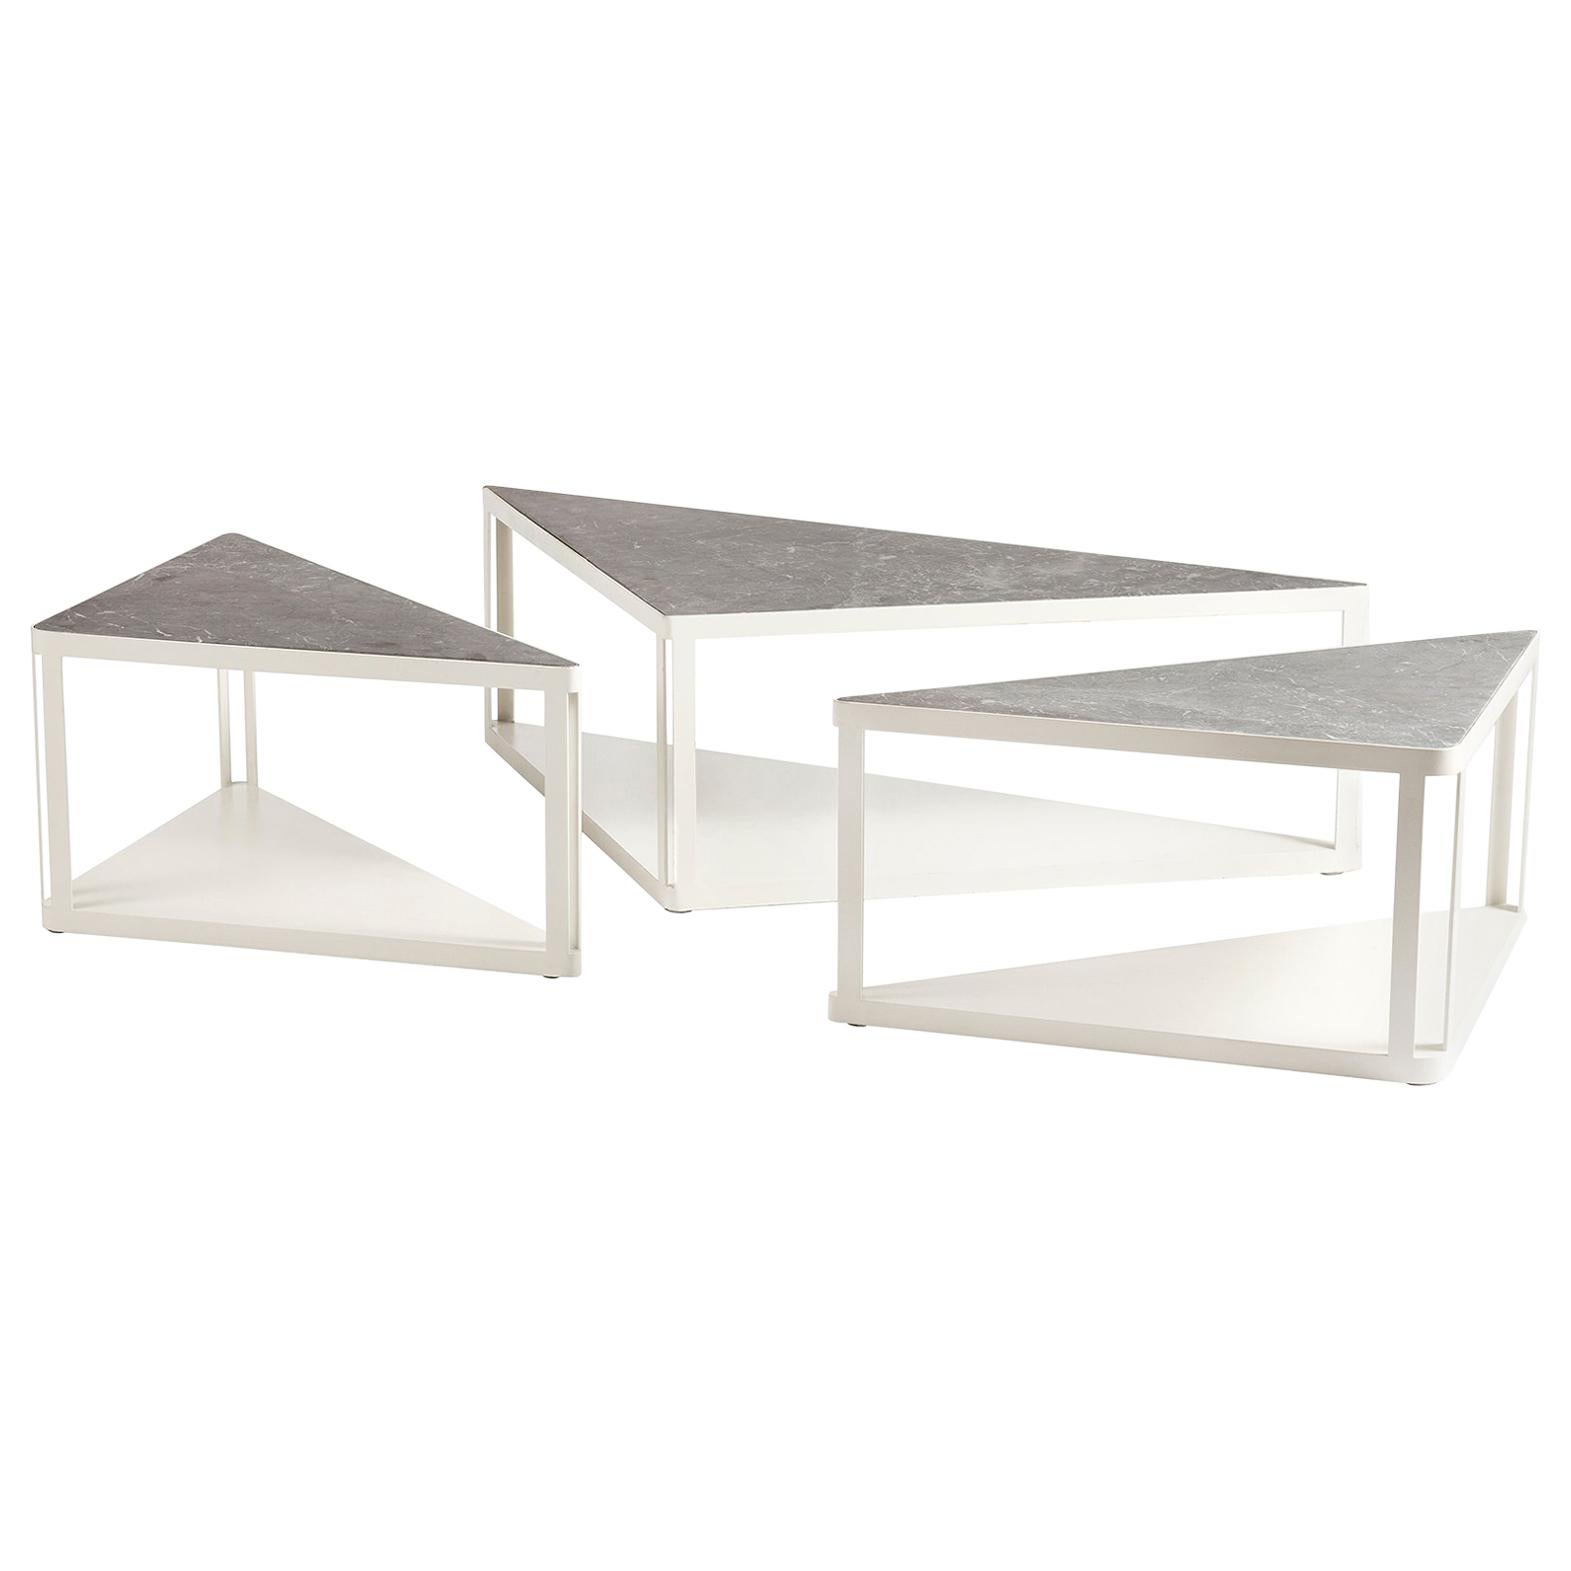 Tri-Zone Table, Modern Marble Triple Centre Table